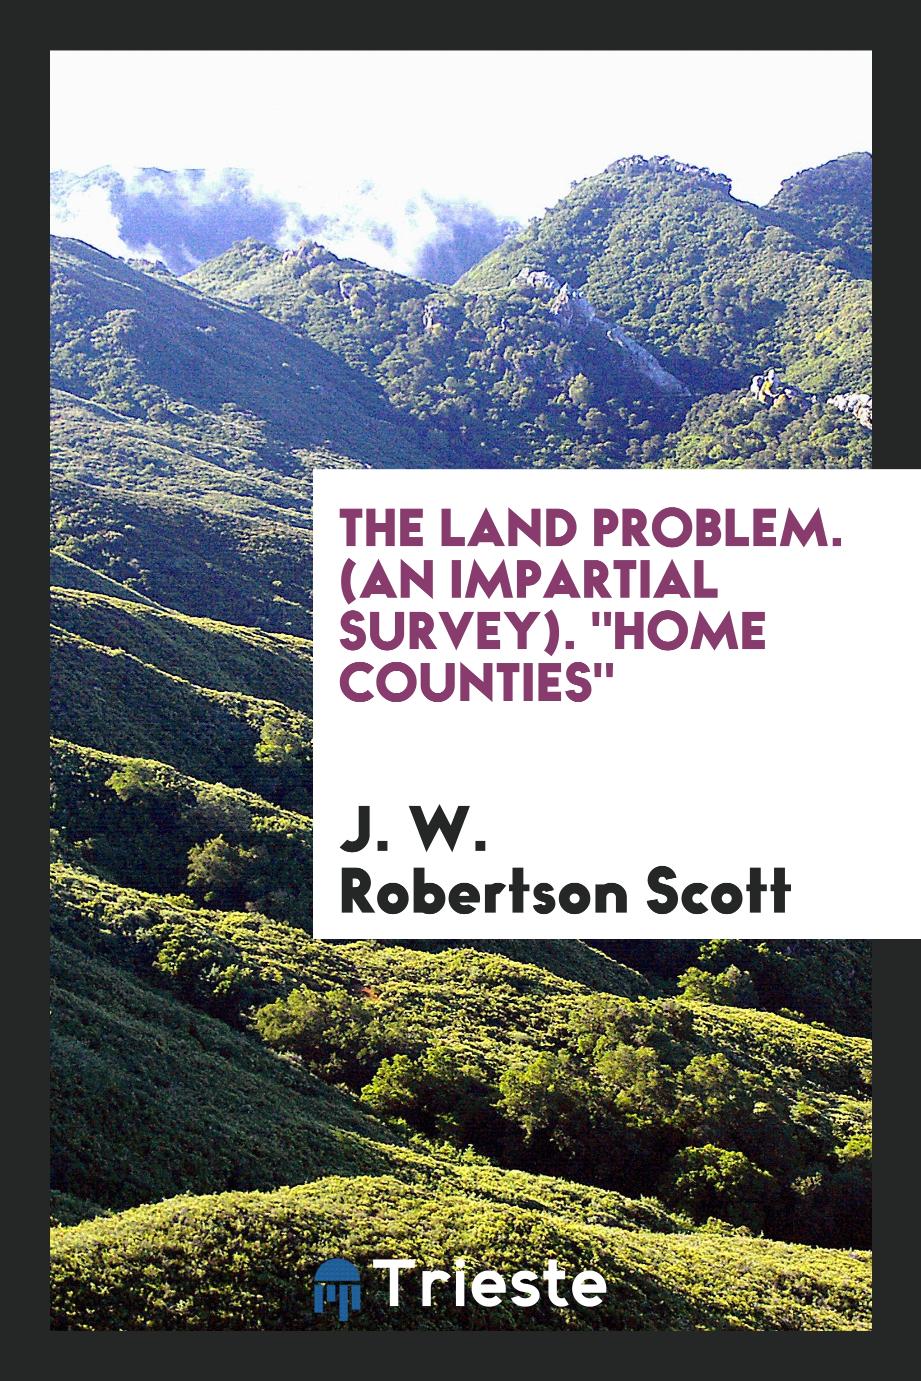 The Land Problem. (An Impartial Survey). "Home Counties"